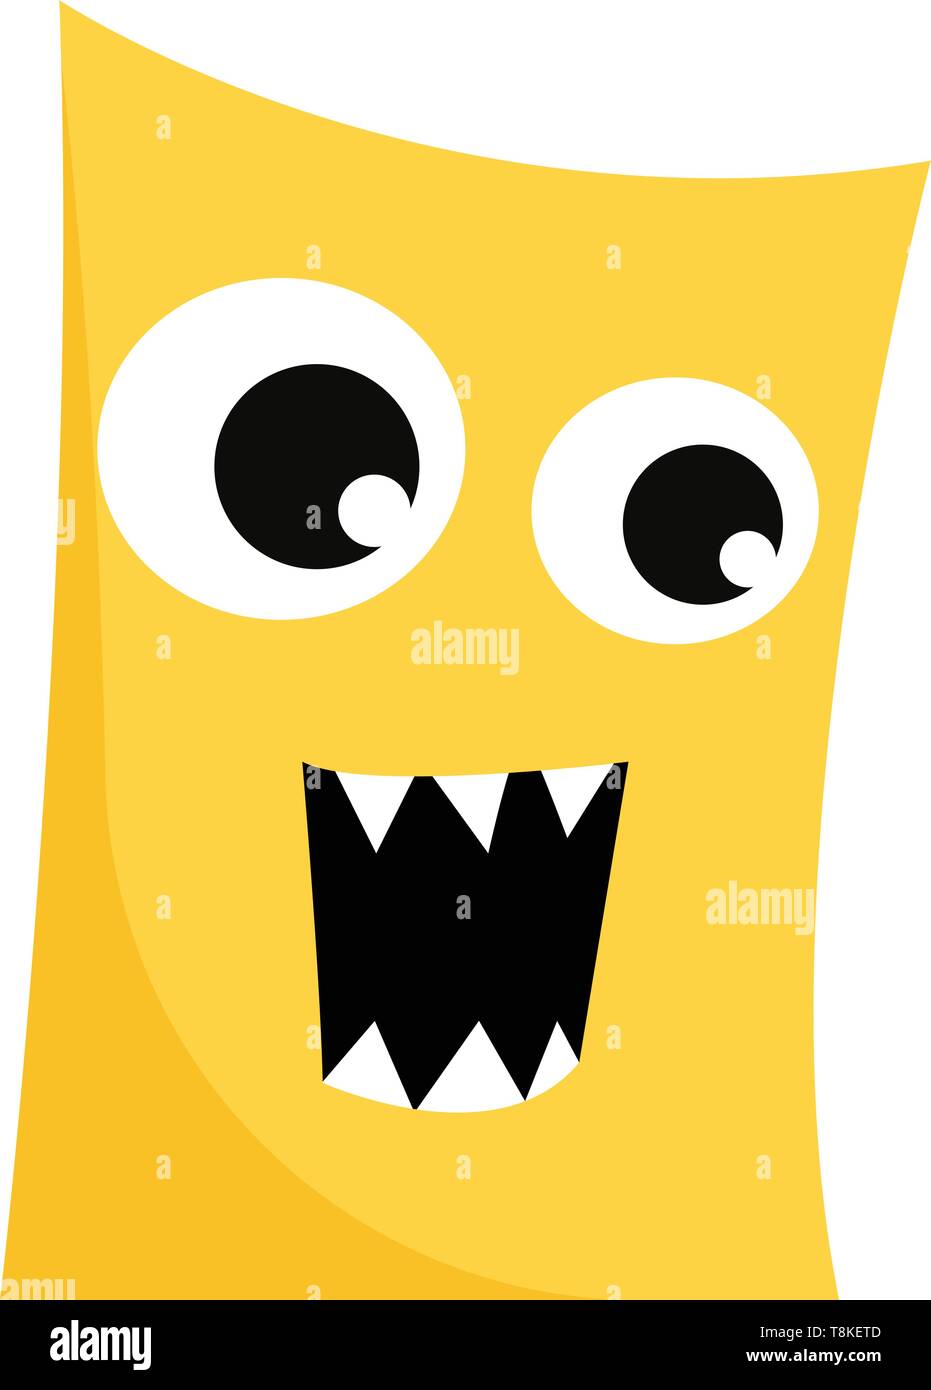 Clipart of a ferocious rectangular-shaped yellow monster with eyes rolled left, fang teeth exposed while mouth wide opened as if to explode with rage, Stock Vector